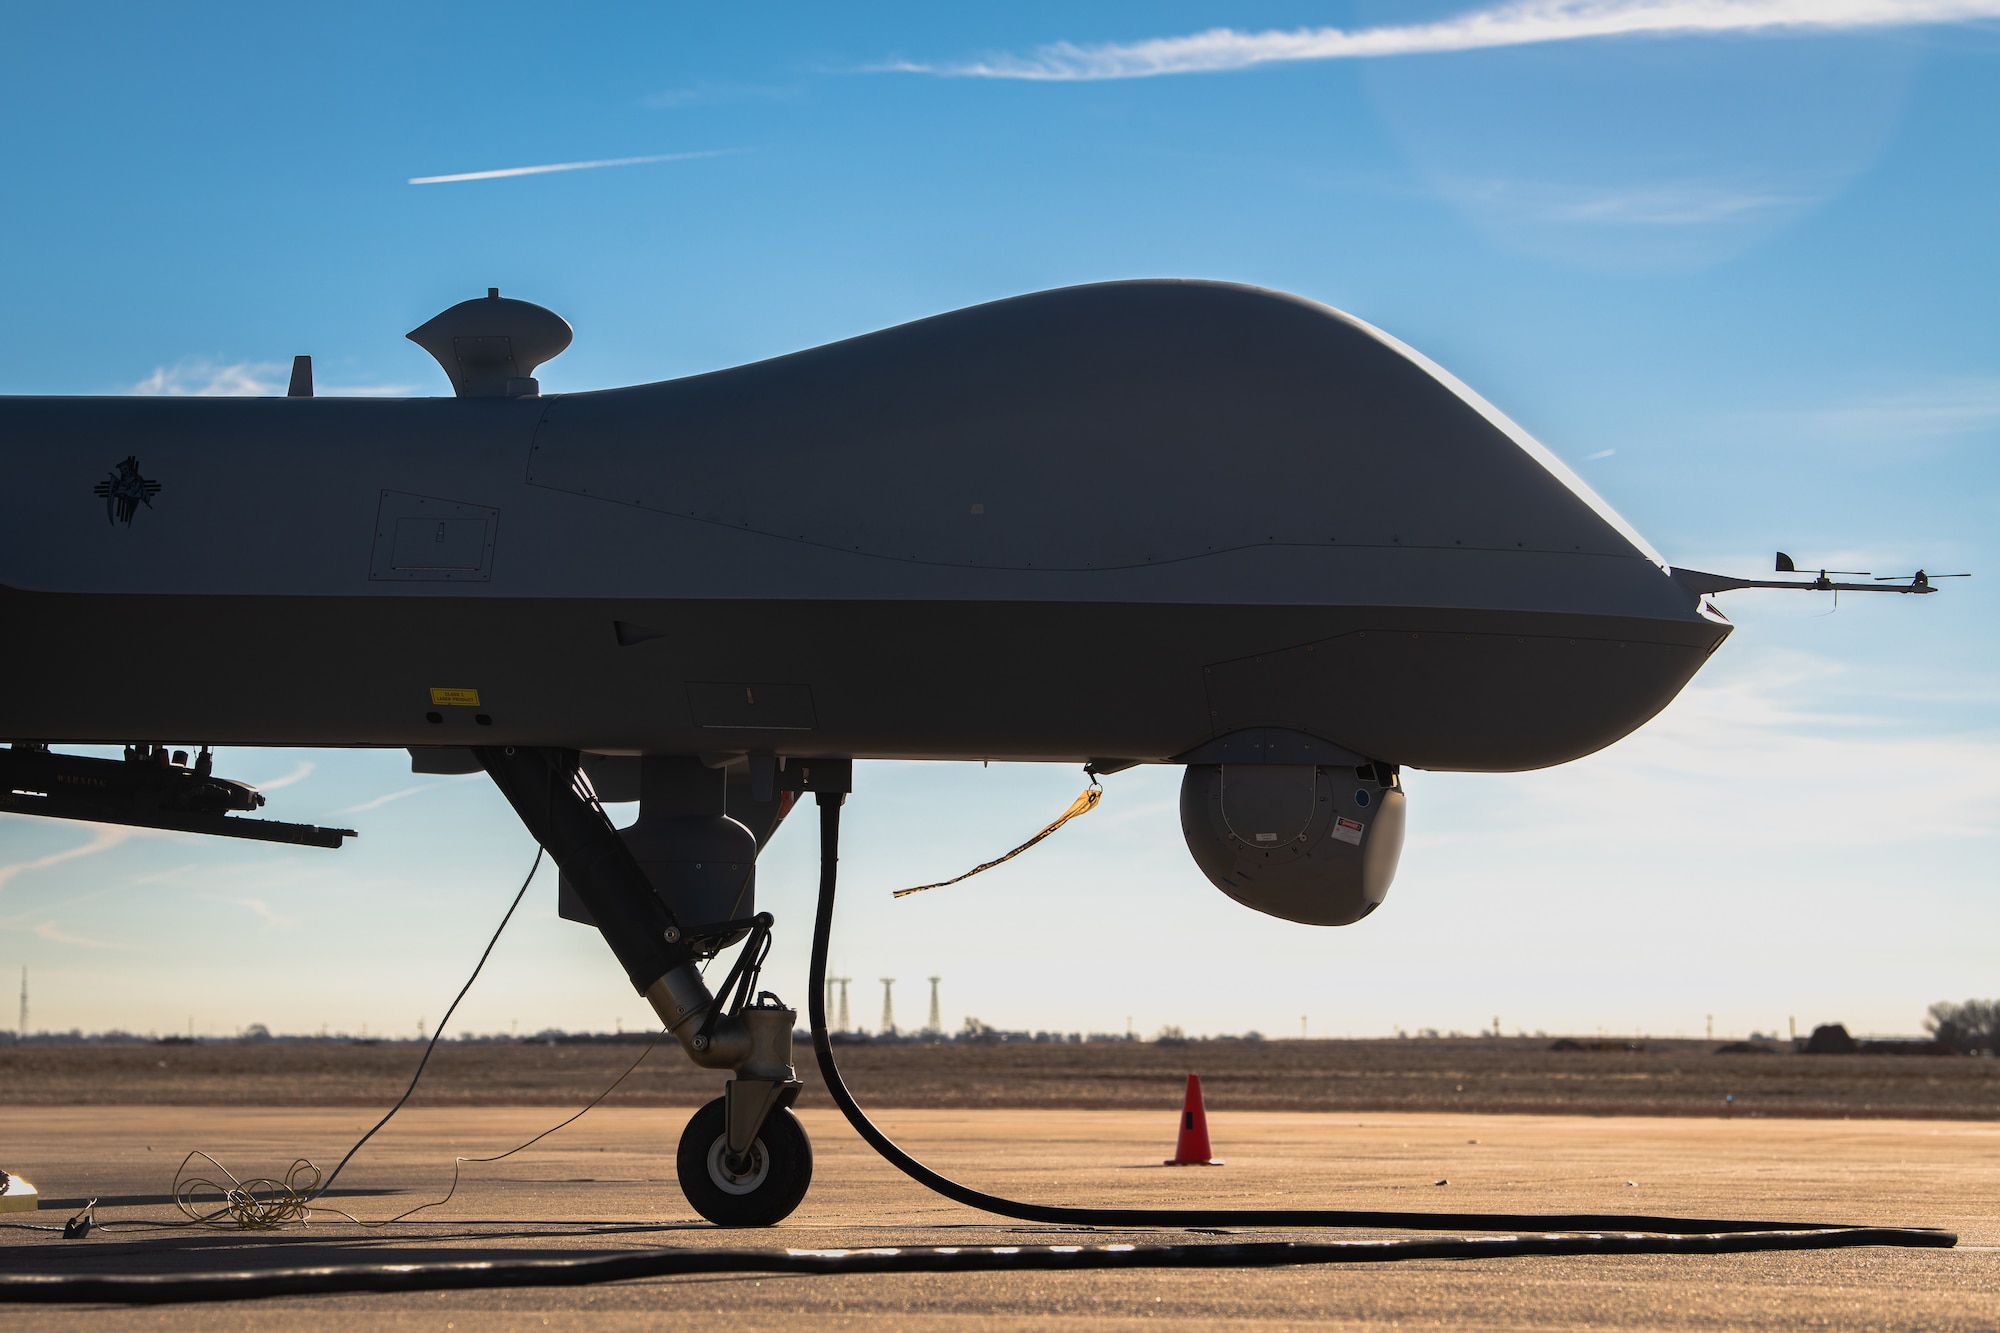 An MQ-9A Reaper remotely piloted aircraft operated by the 3rd Special Operations Squadron undergoes pre-flight checks before an experimental multi-aircraft control flight for the Adaptive Airborne Enterprise (A2E) at Cannon Air Force Base, N.M., Dec. 6, 2023. The flight marked the first attempt to simultaneously operate multiple remote aircraft from a single point of control. (U.S. Air Force photo by Staff Sgt. Vernon R. Walter III) (This photo has been edited for security purposes by blurring out aircraft information)